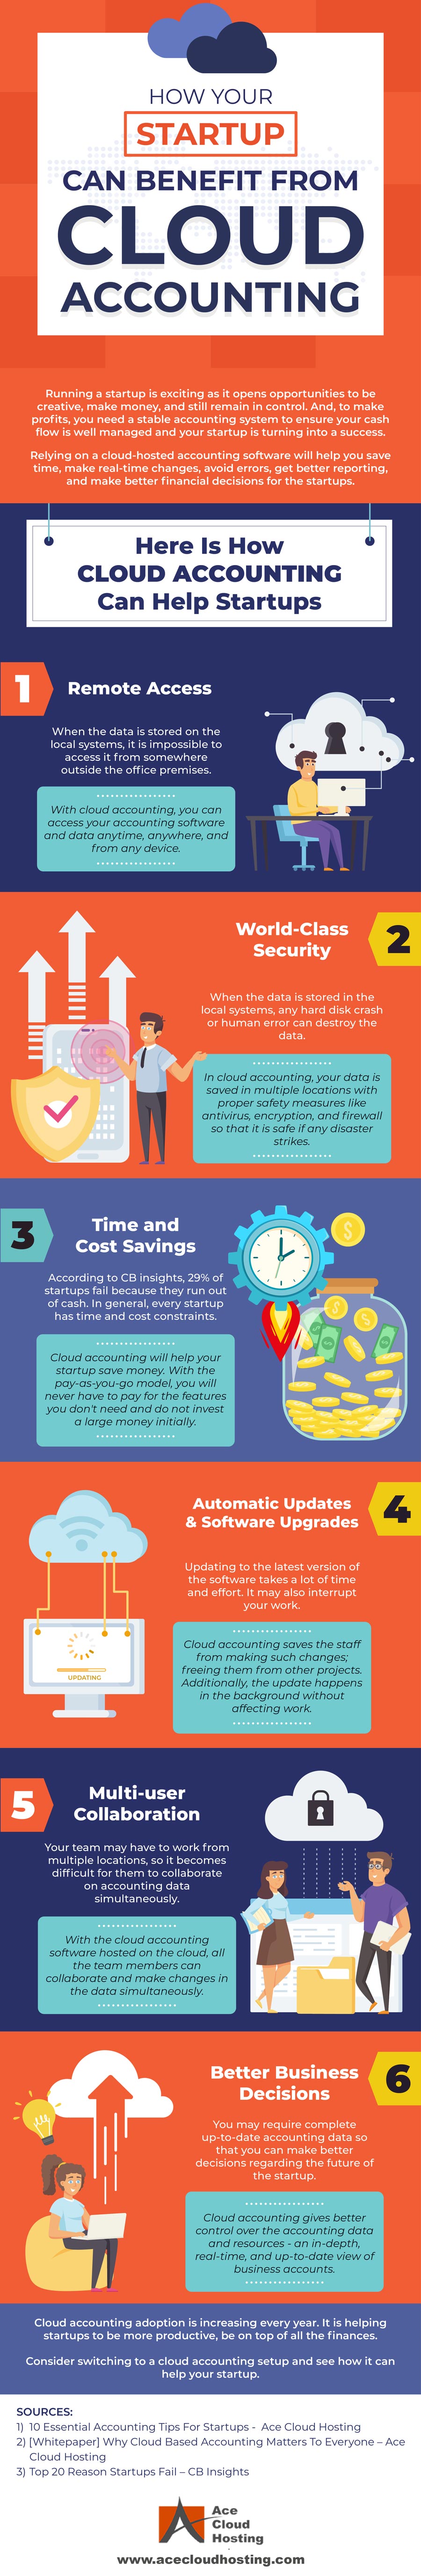 [Infographic] 6 Ways How Cloud Accounting Benefits Early-Stage Startups